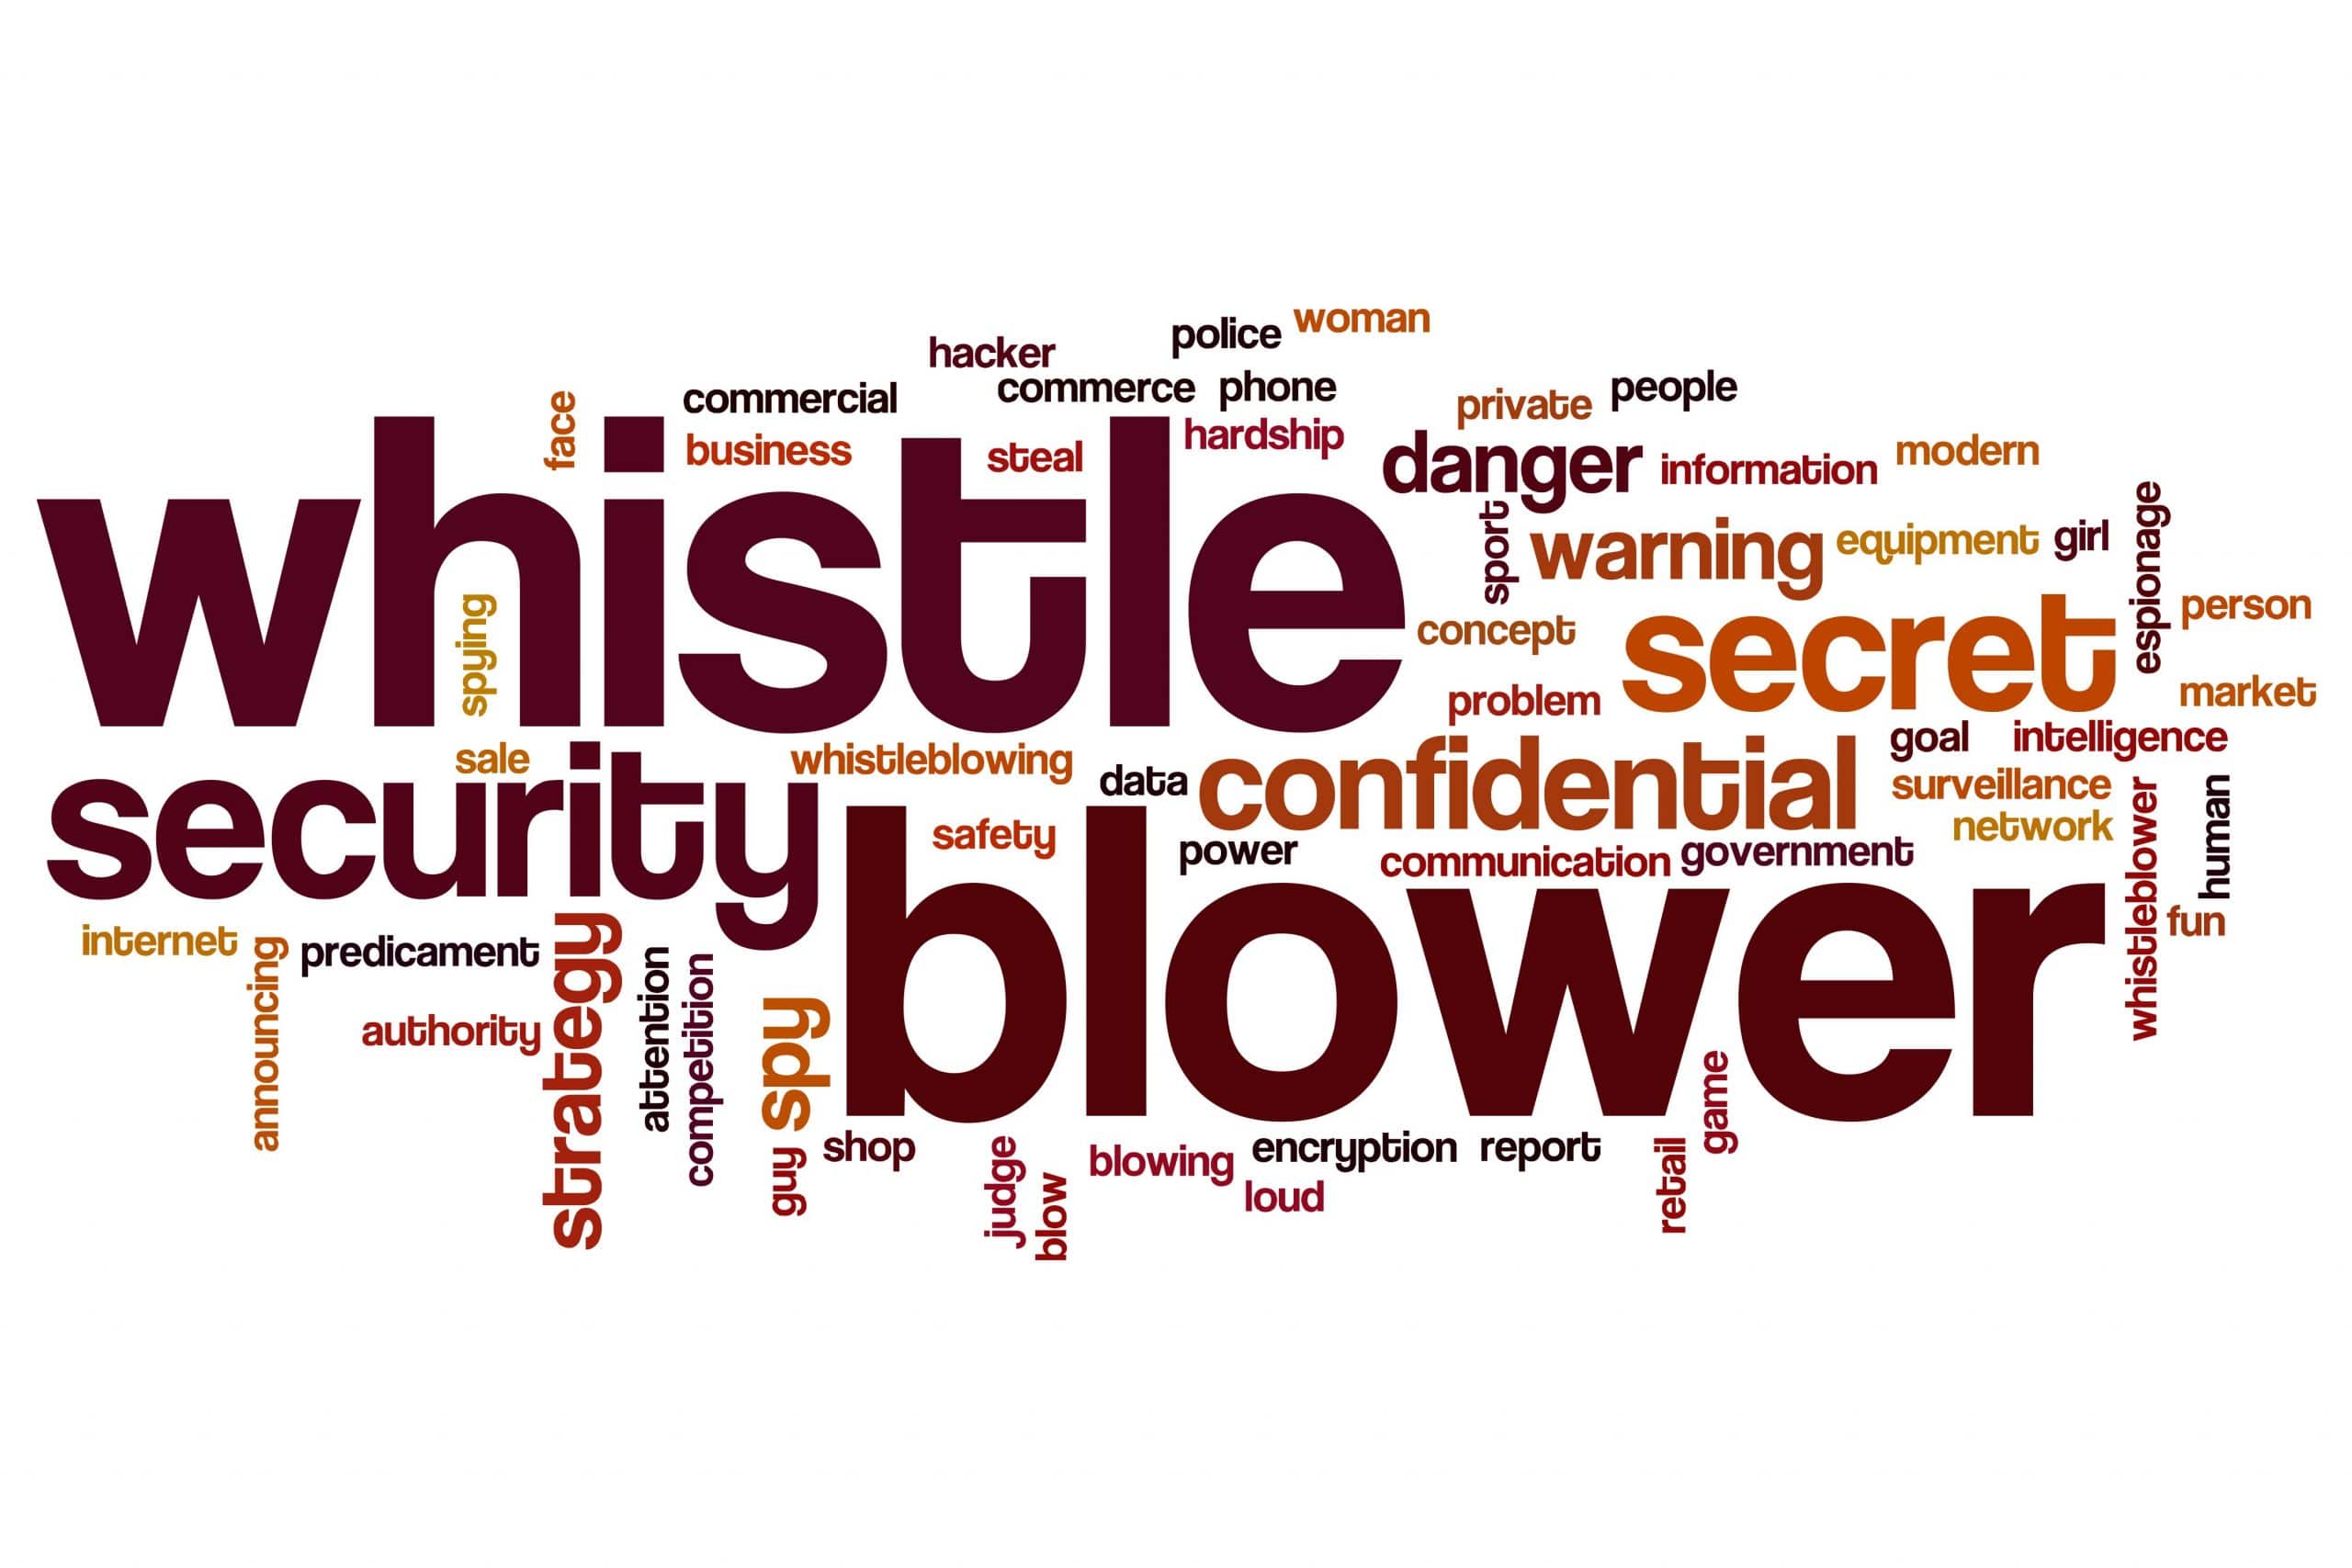 WHAT IS WHISTLEBLOWING?